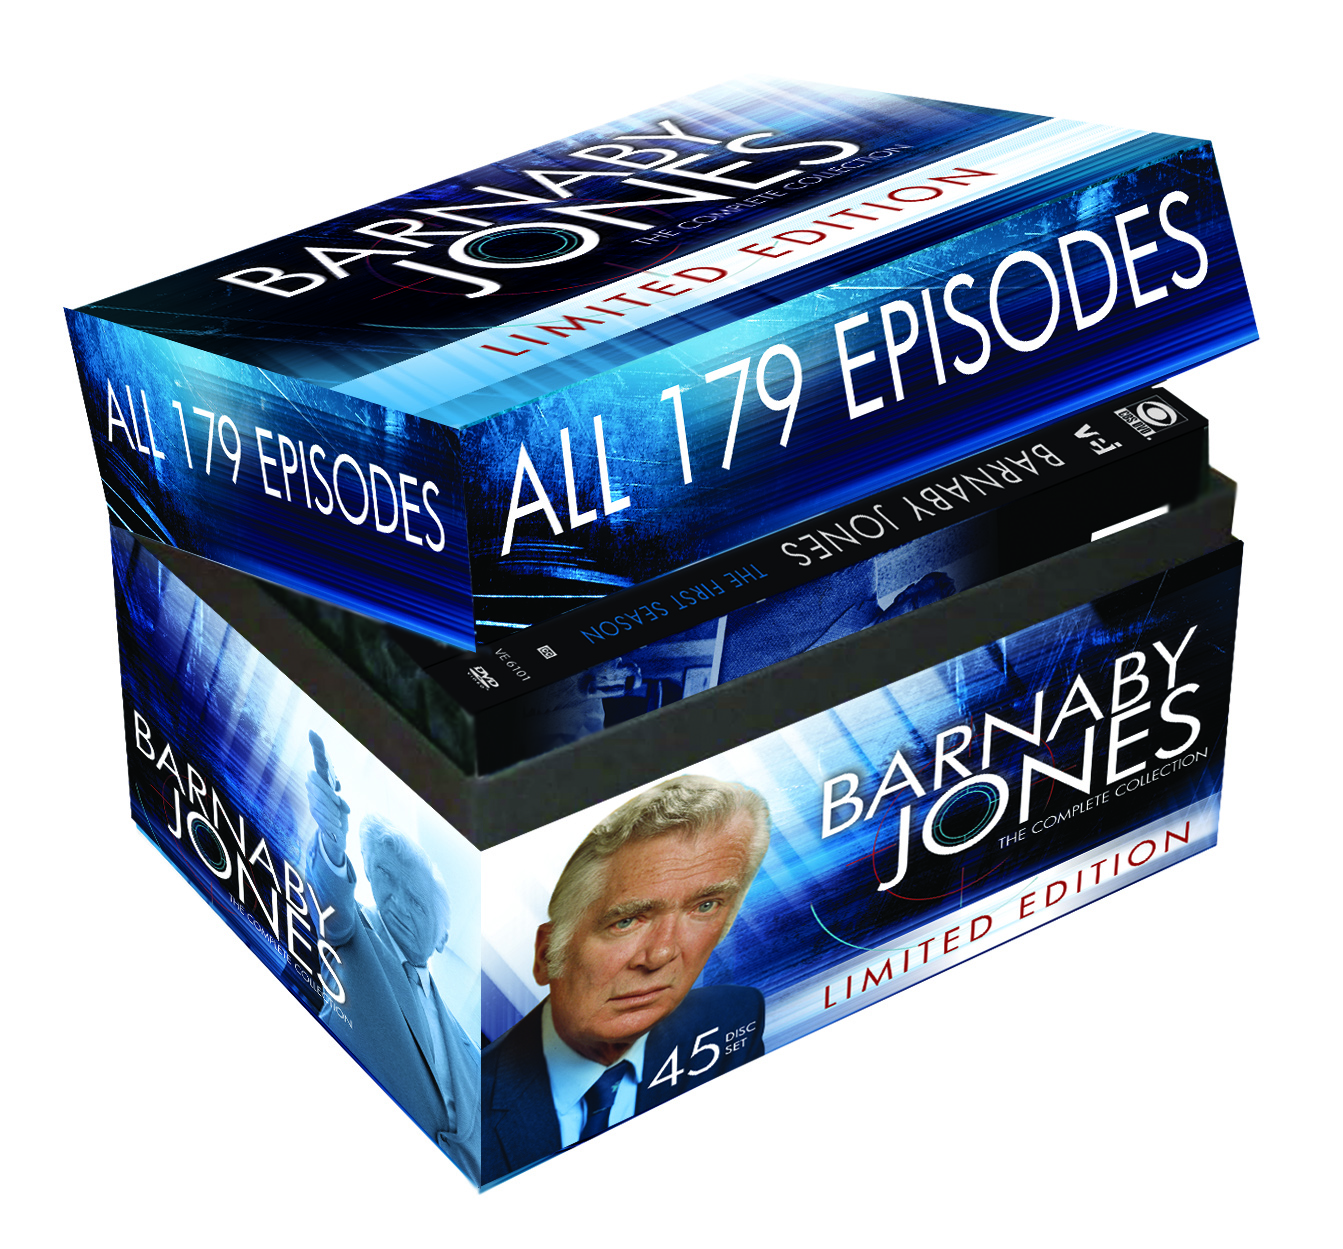 Barnaby Jones: The Complete Collection